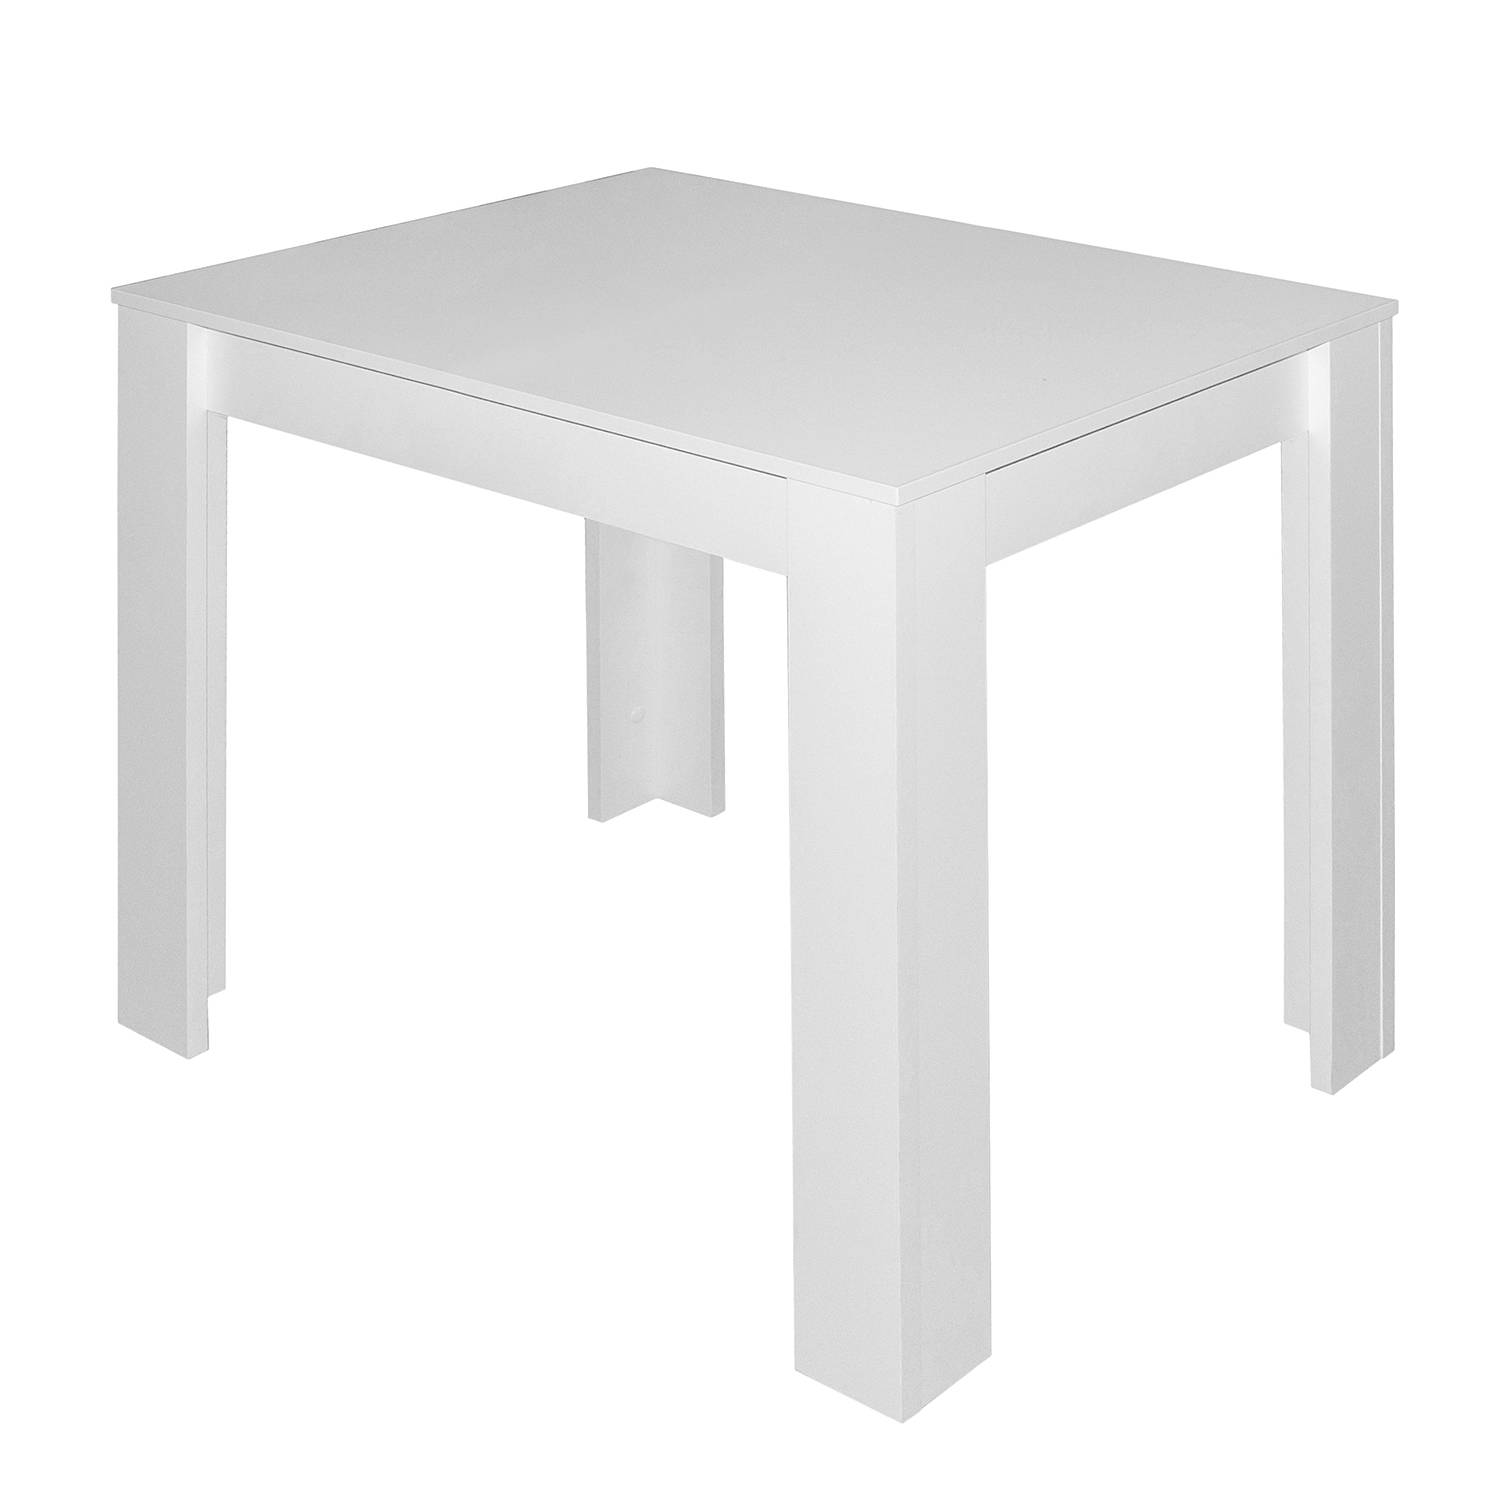 Image of Table Fairford 000000001000121321